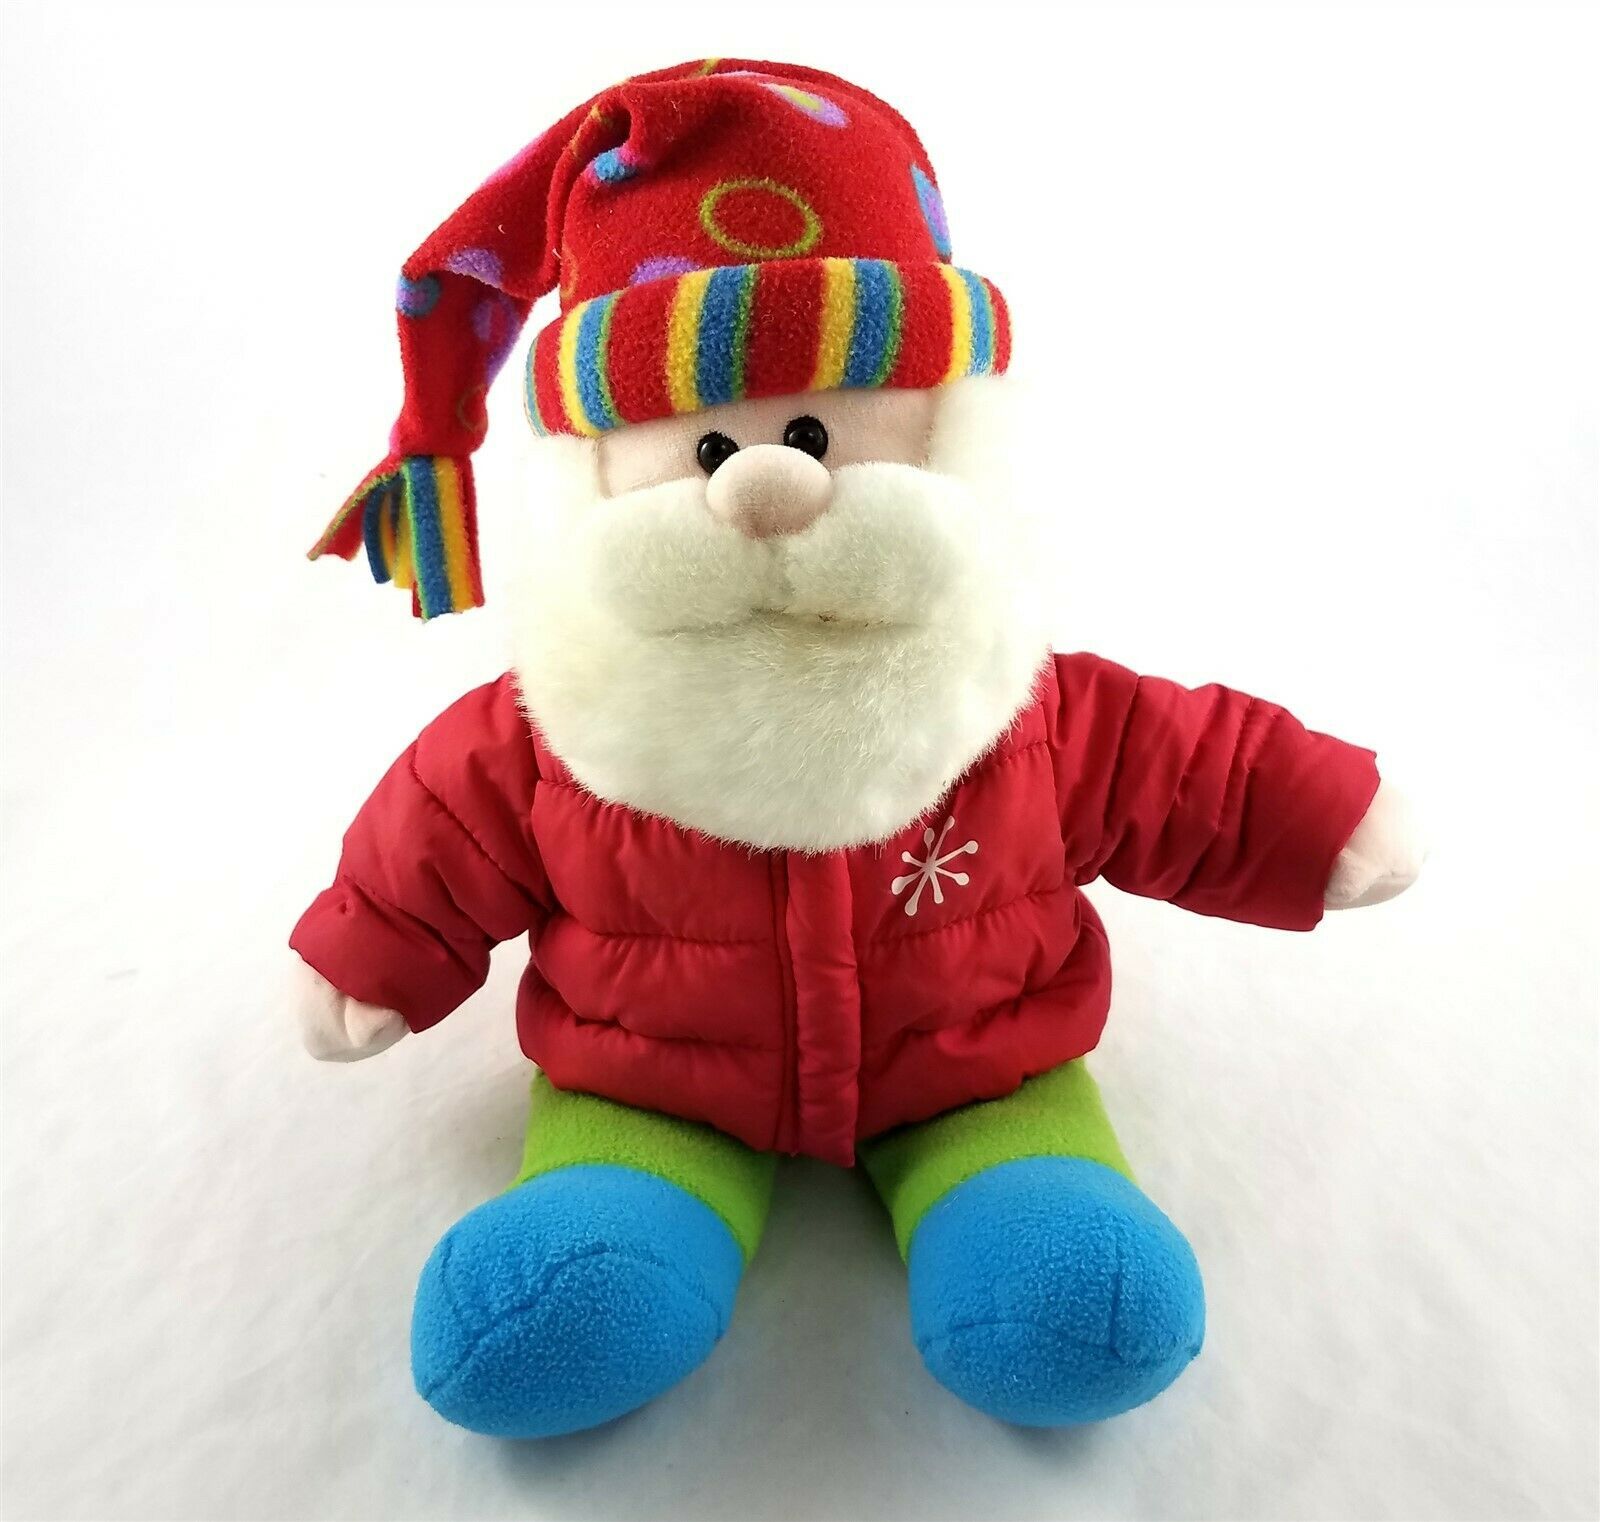 Primary image for Dan Dee Collectors Choice Santa Claus Plush Toy 16 Inch Stuffed Animal